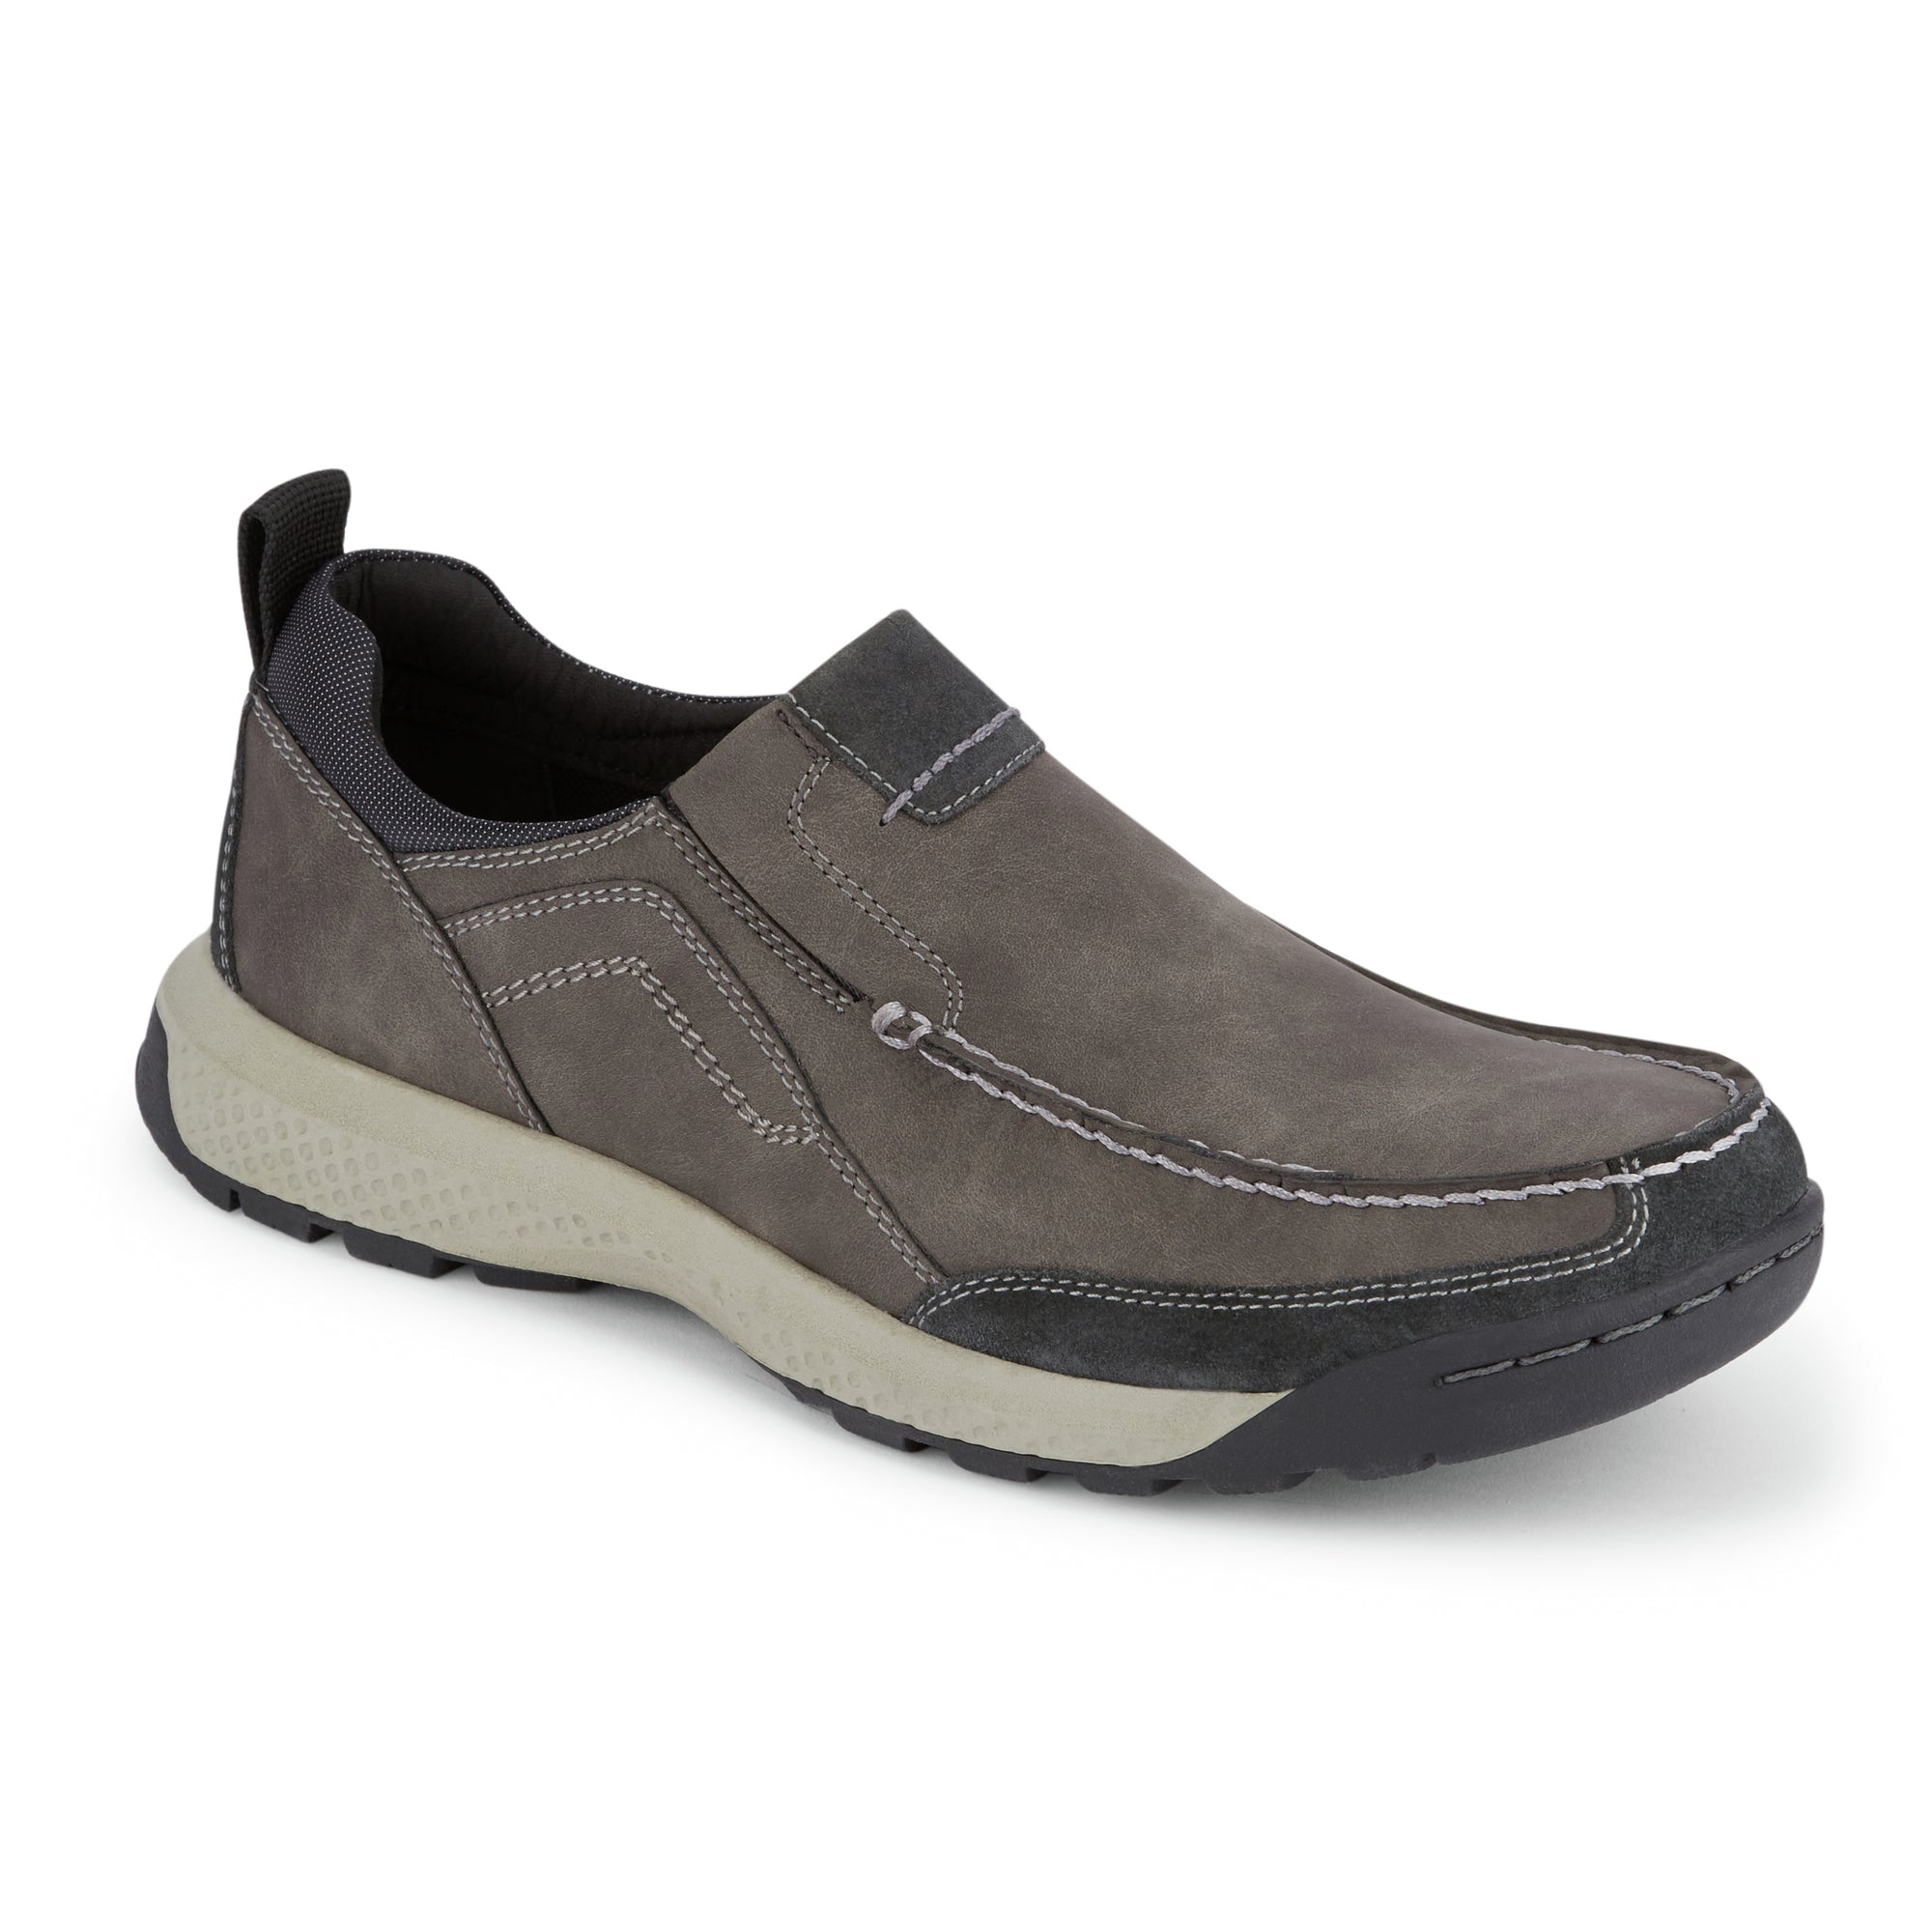 men's rugged casual shoes